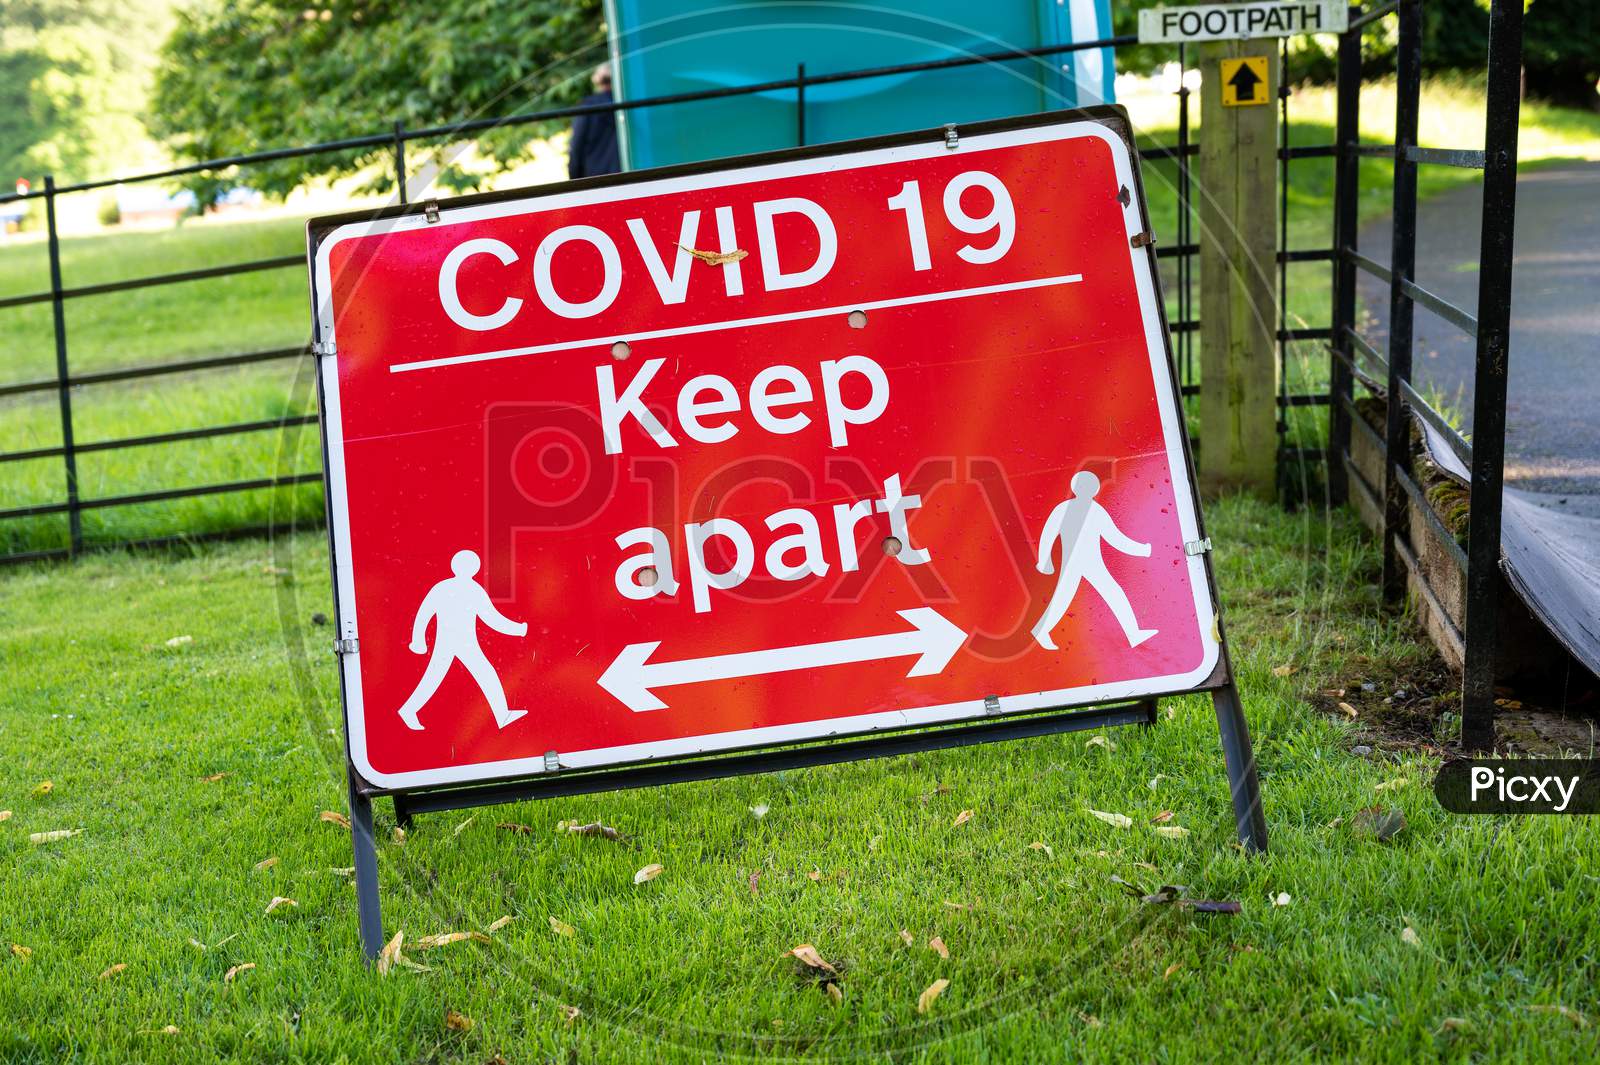 A Covid-19 Social Distancing Warning Sign At An Outdoor Event